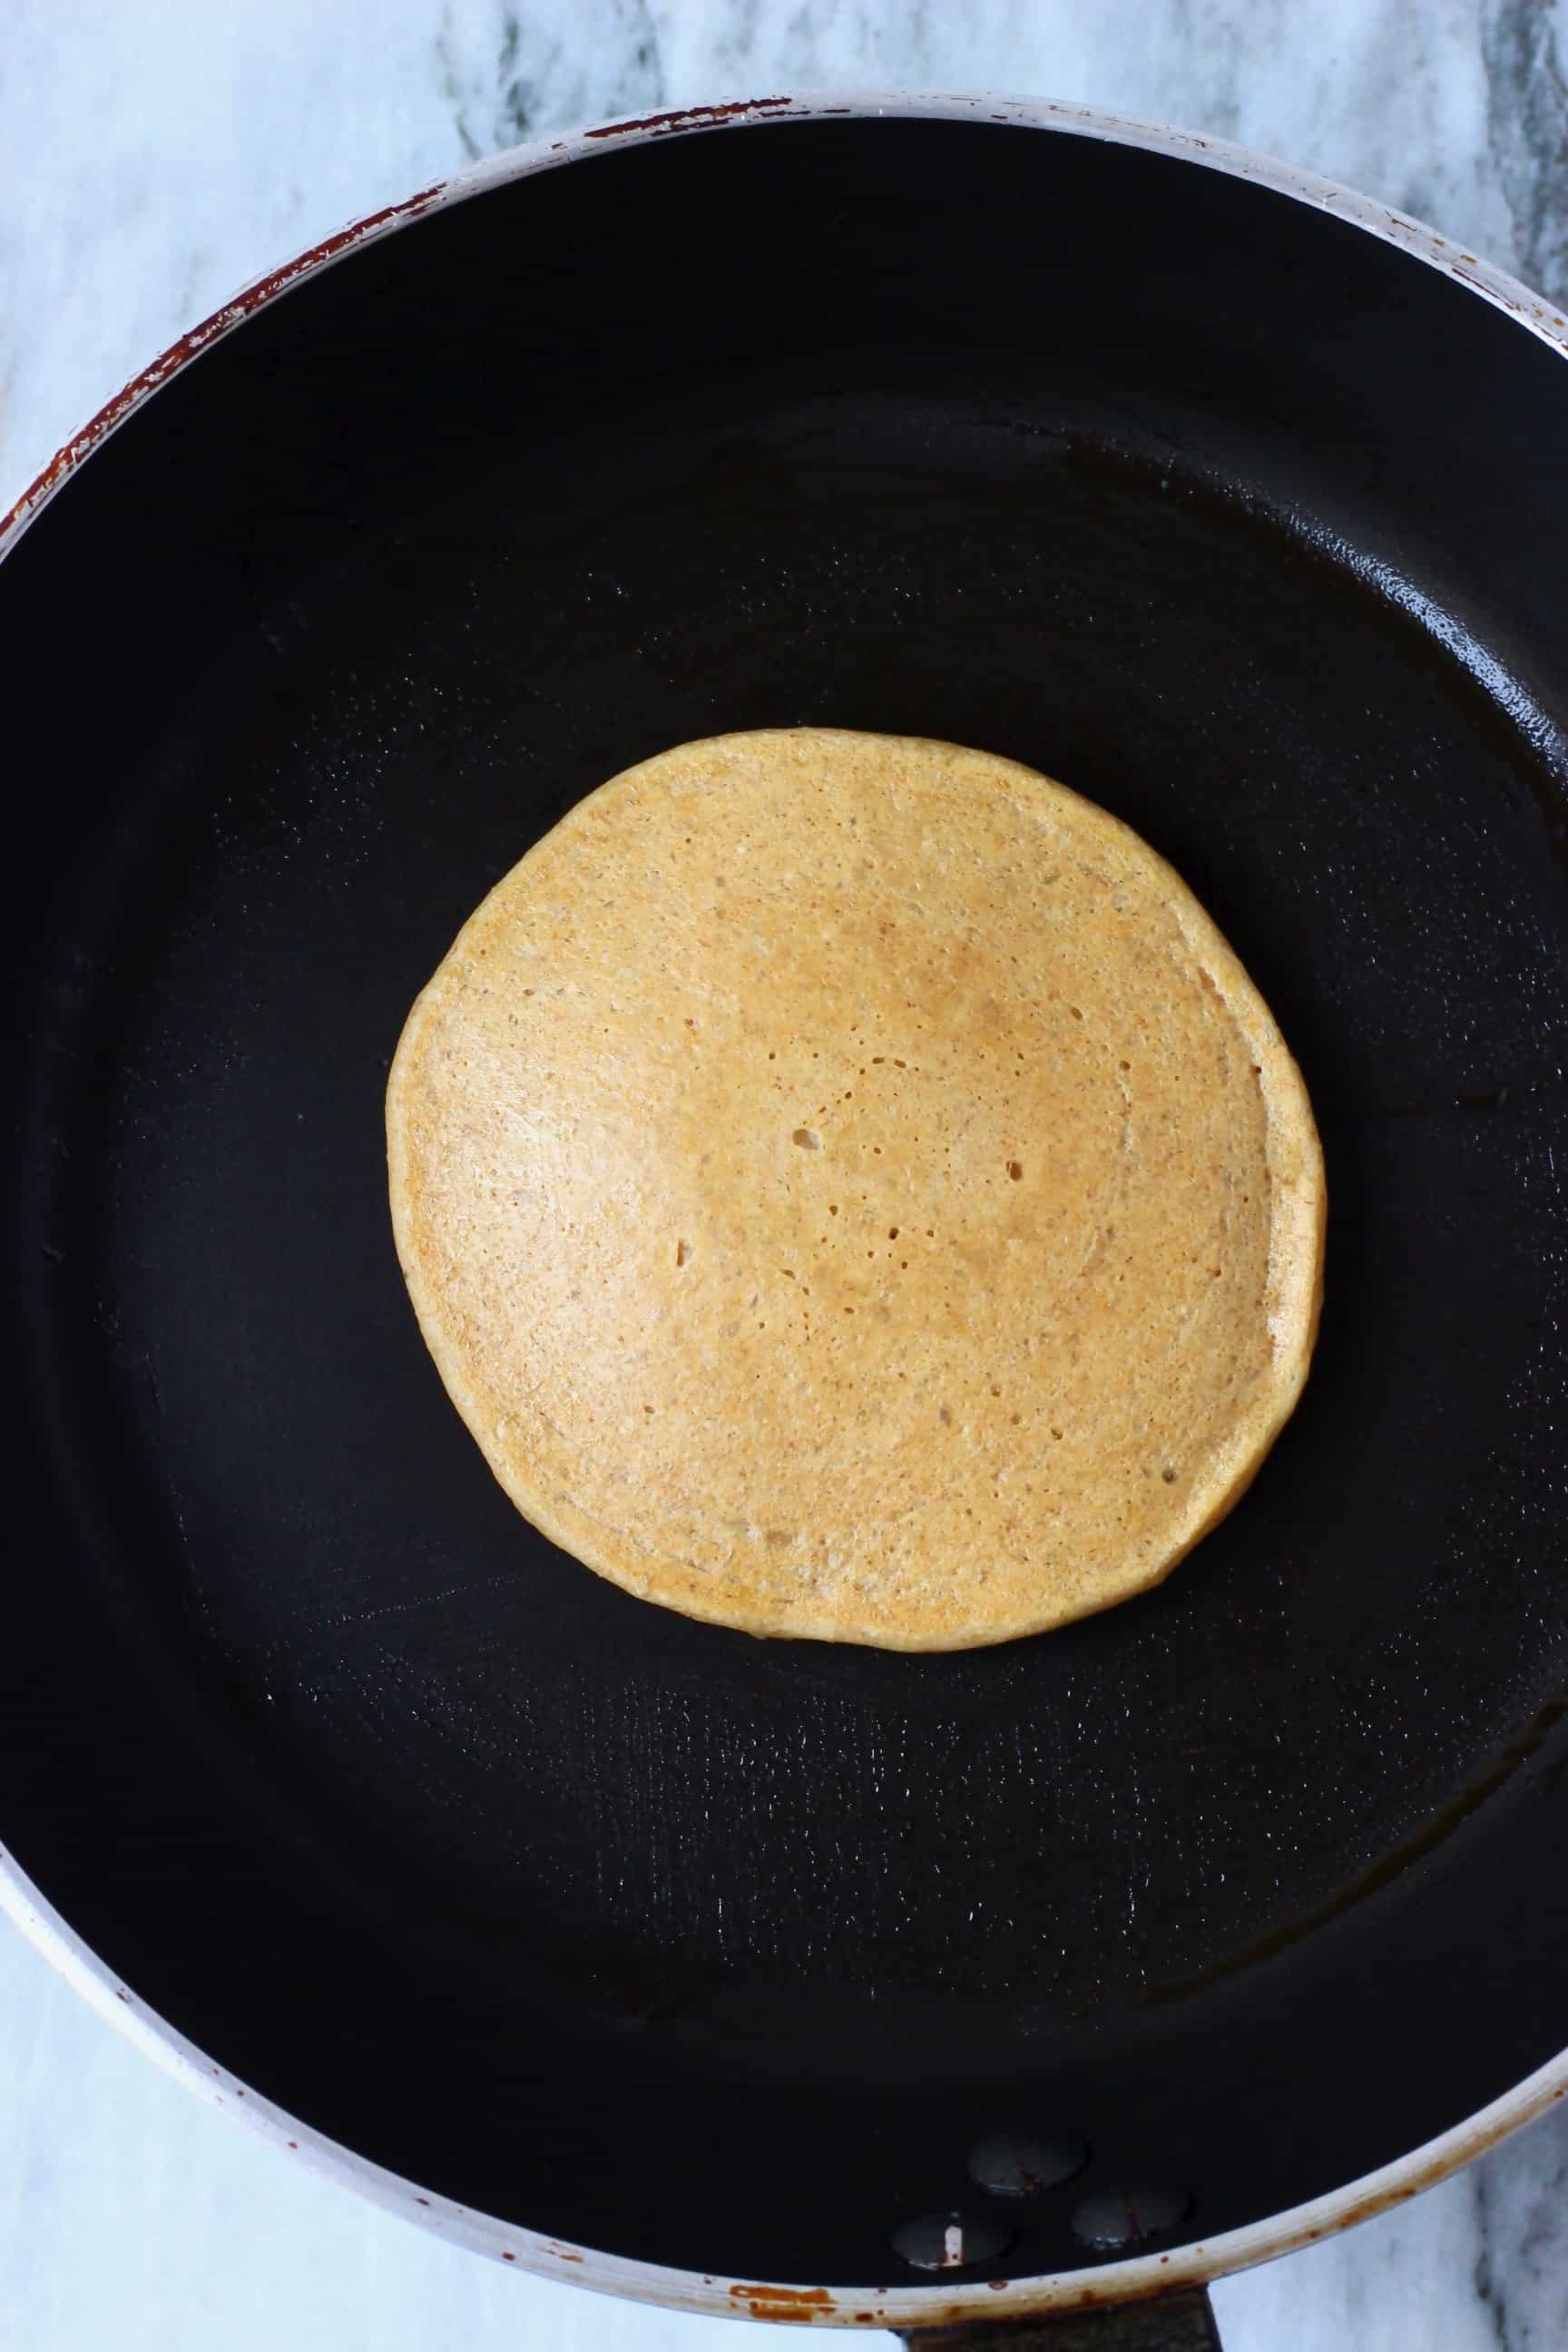 A banana oatmeal pancake being cooked in a black frying pan against a marble background